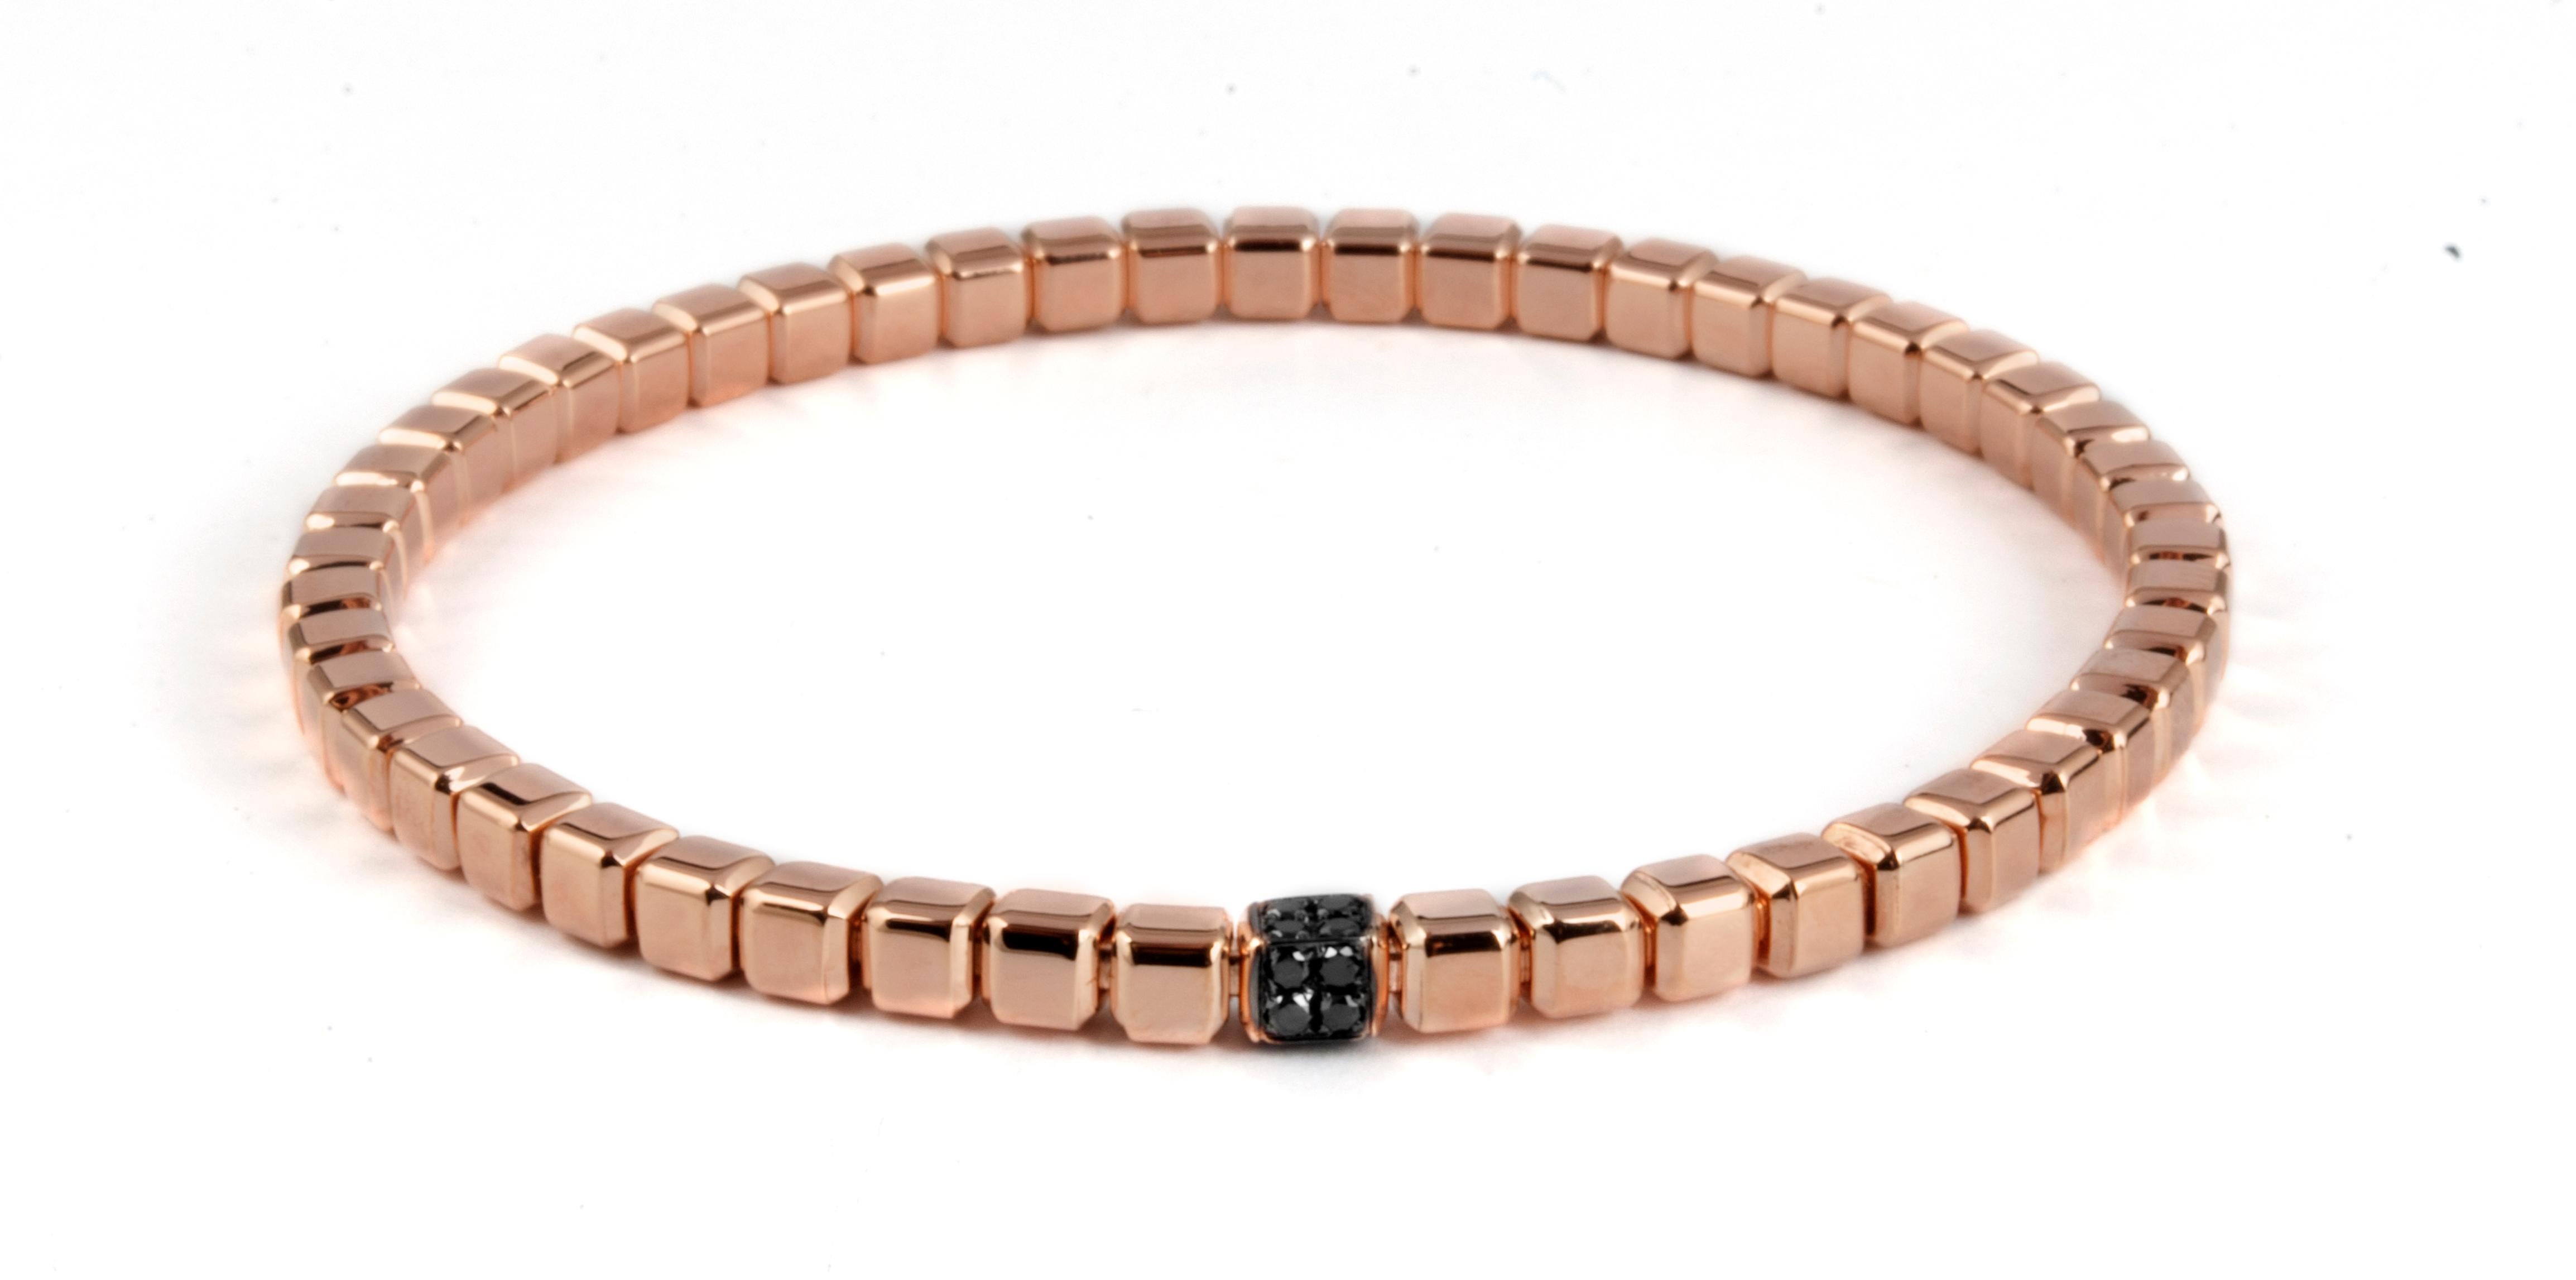 Delicate yet distinctive, this 18K rose gold bracelet features an inner strong elastic concealed with small cubes of 18carat gold. A single, central cube adds sparkle, studded with pave black diamonds on all four sides for a stylish look. Available